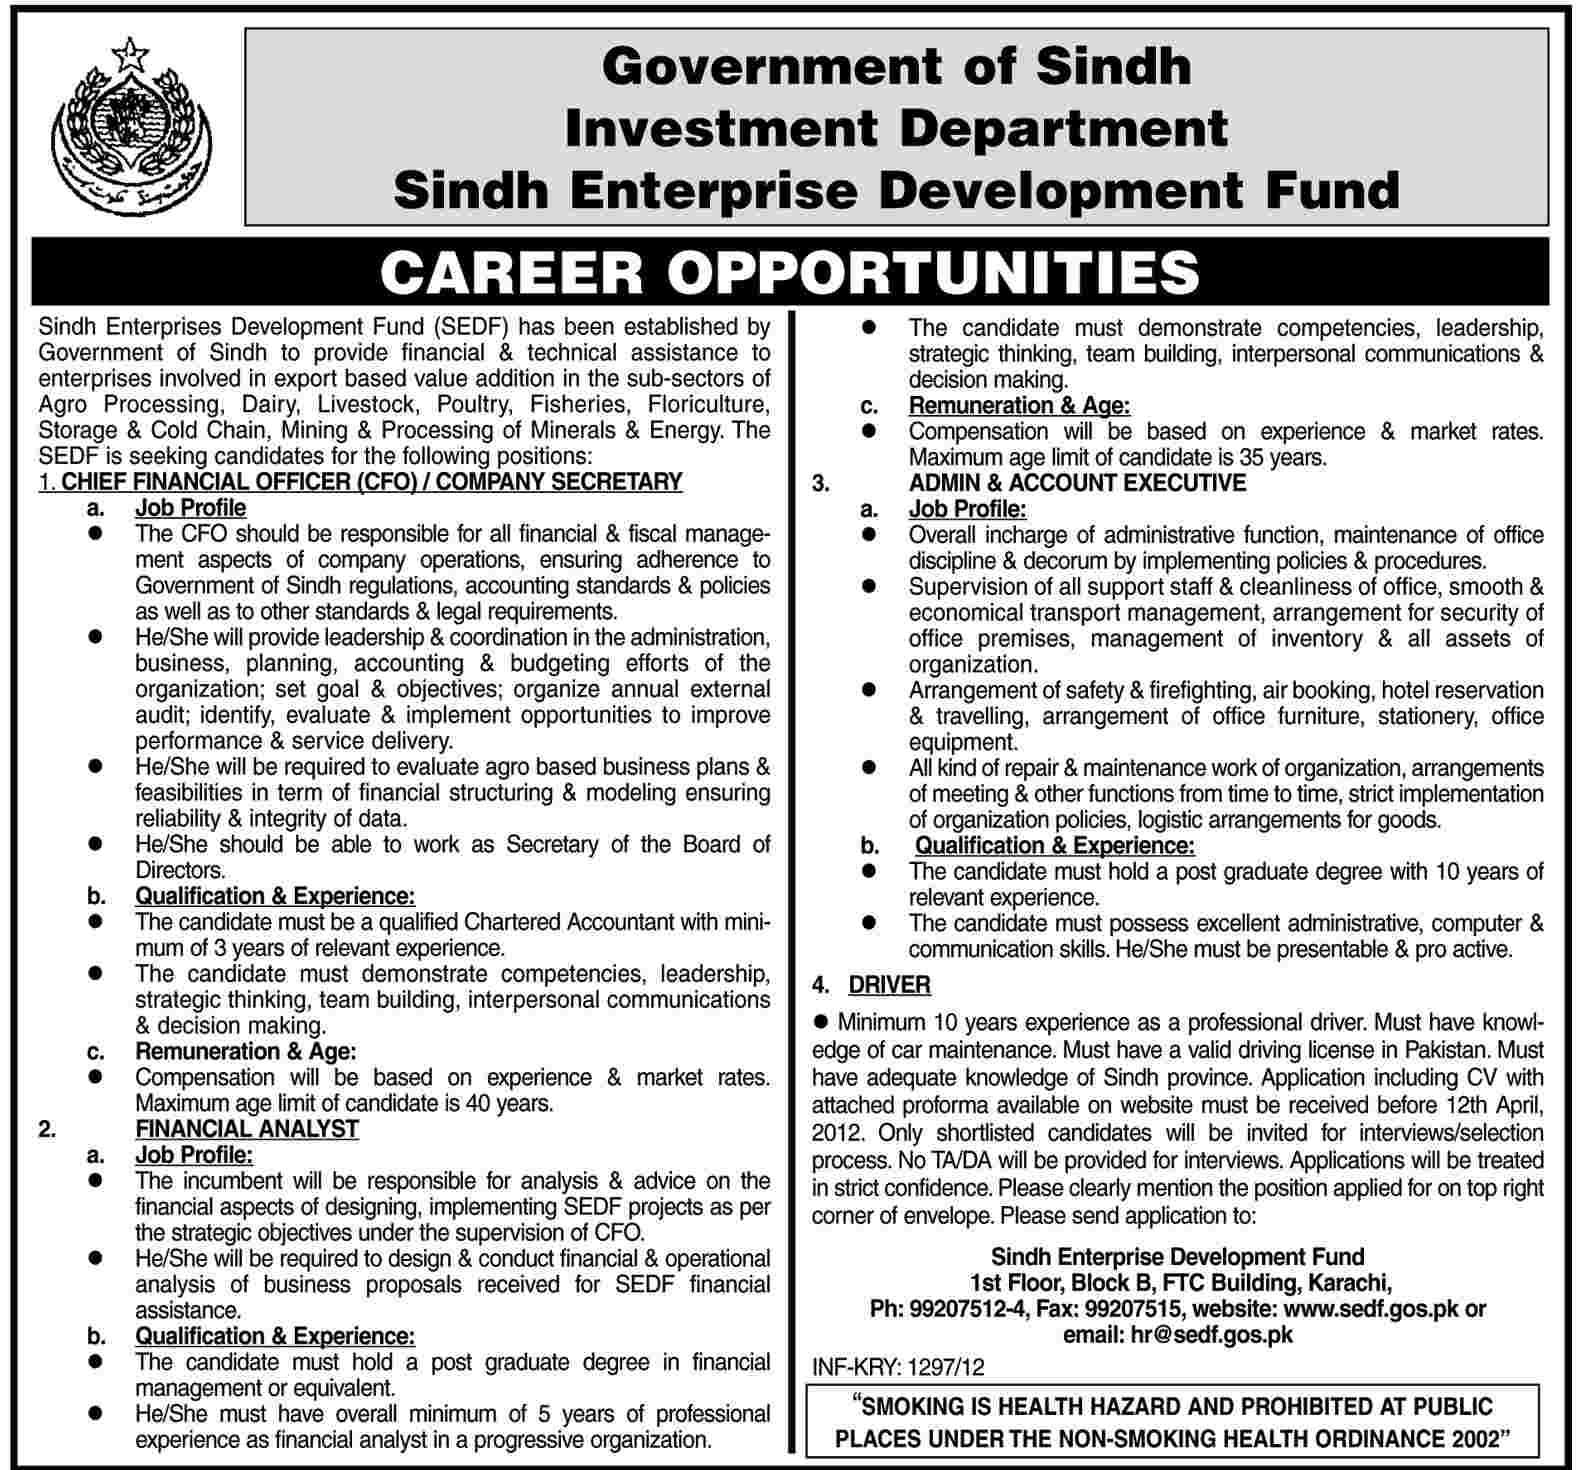 Investment Department, Government of Sindh Jobs